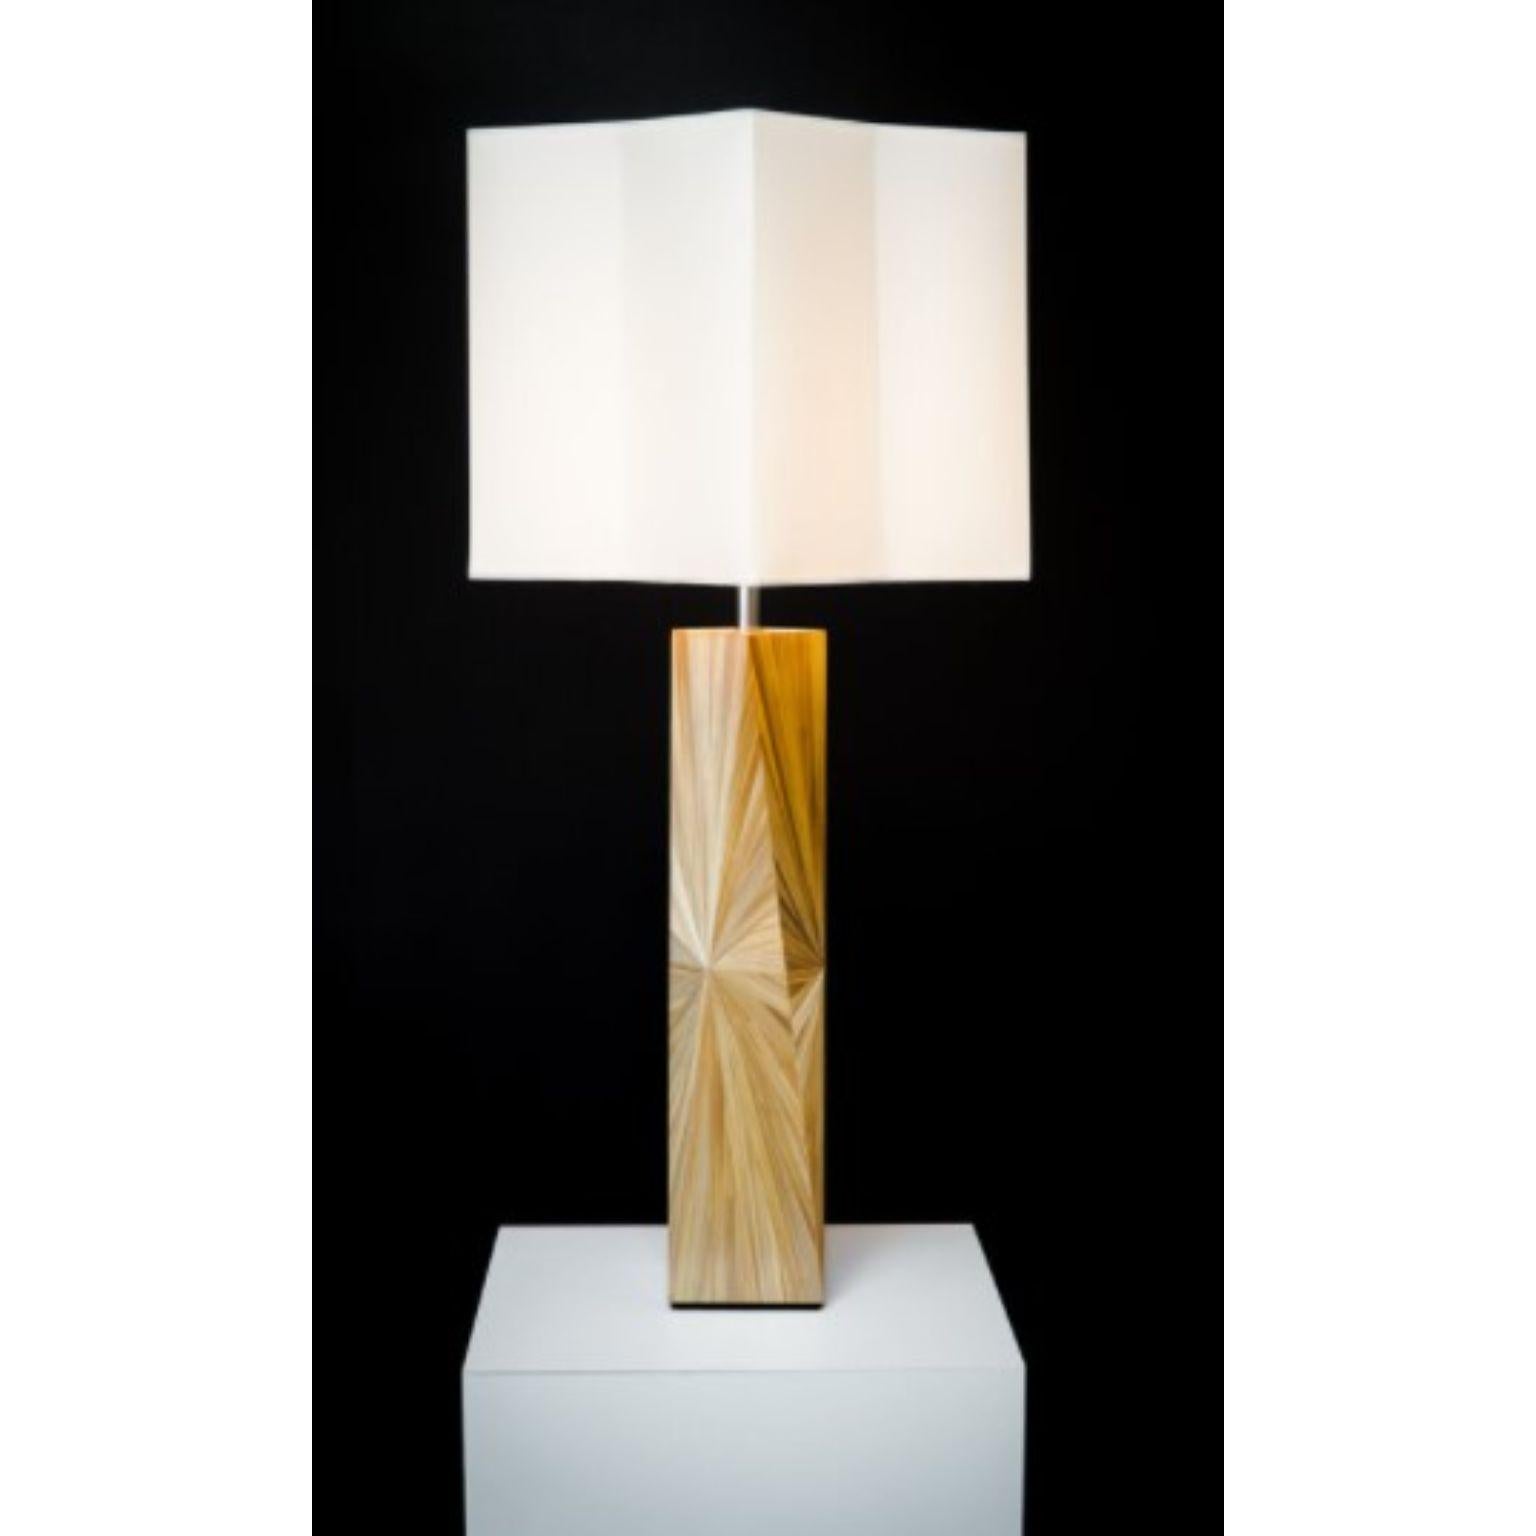 Franck yellow table lamp by Pierre-Axel Coulibeuf
Dimensions: W40 x D40 x H78 cm
Materials: straw marquetry, nickel
Edition of 20 + 4AP
The Franck lamp is available in a variety of colors.

All our lamps can be wired according to each country.